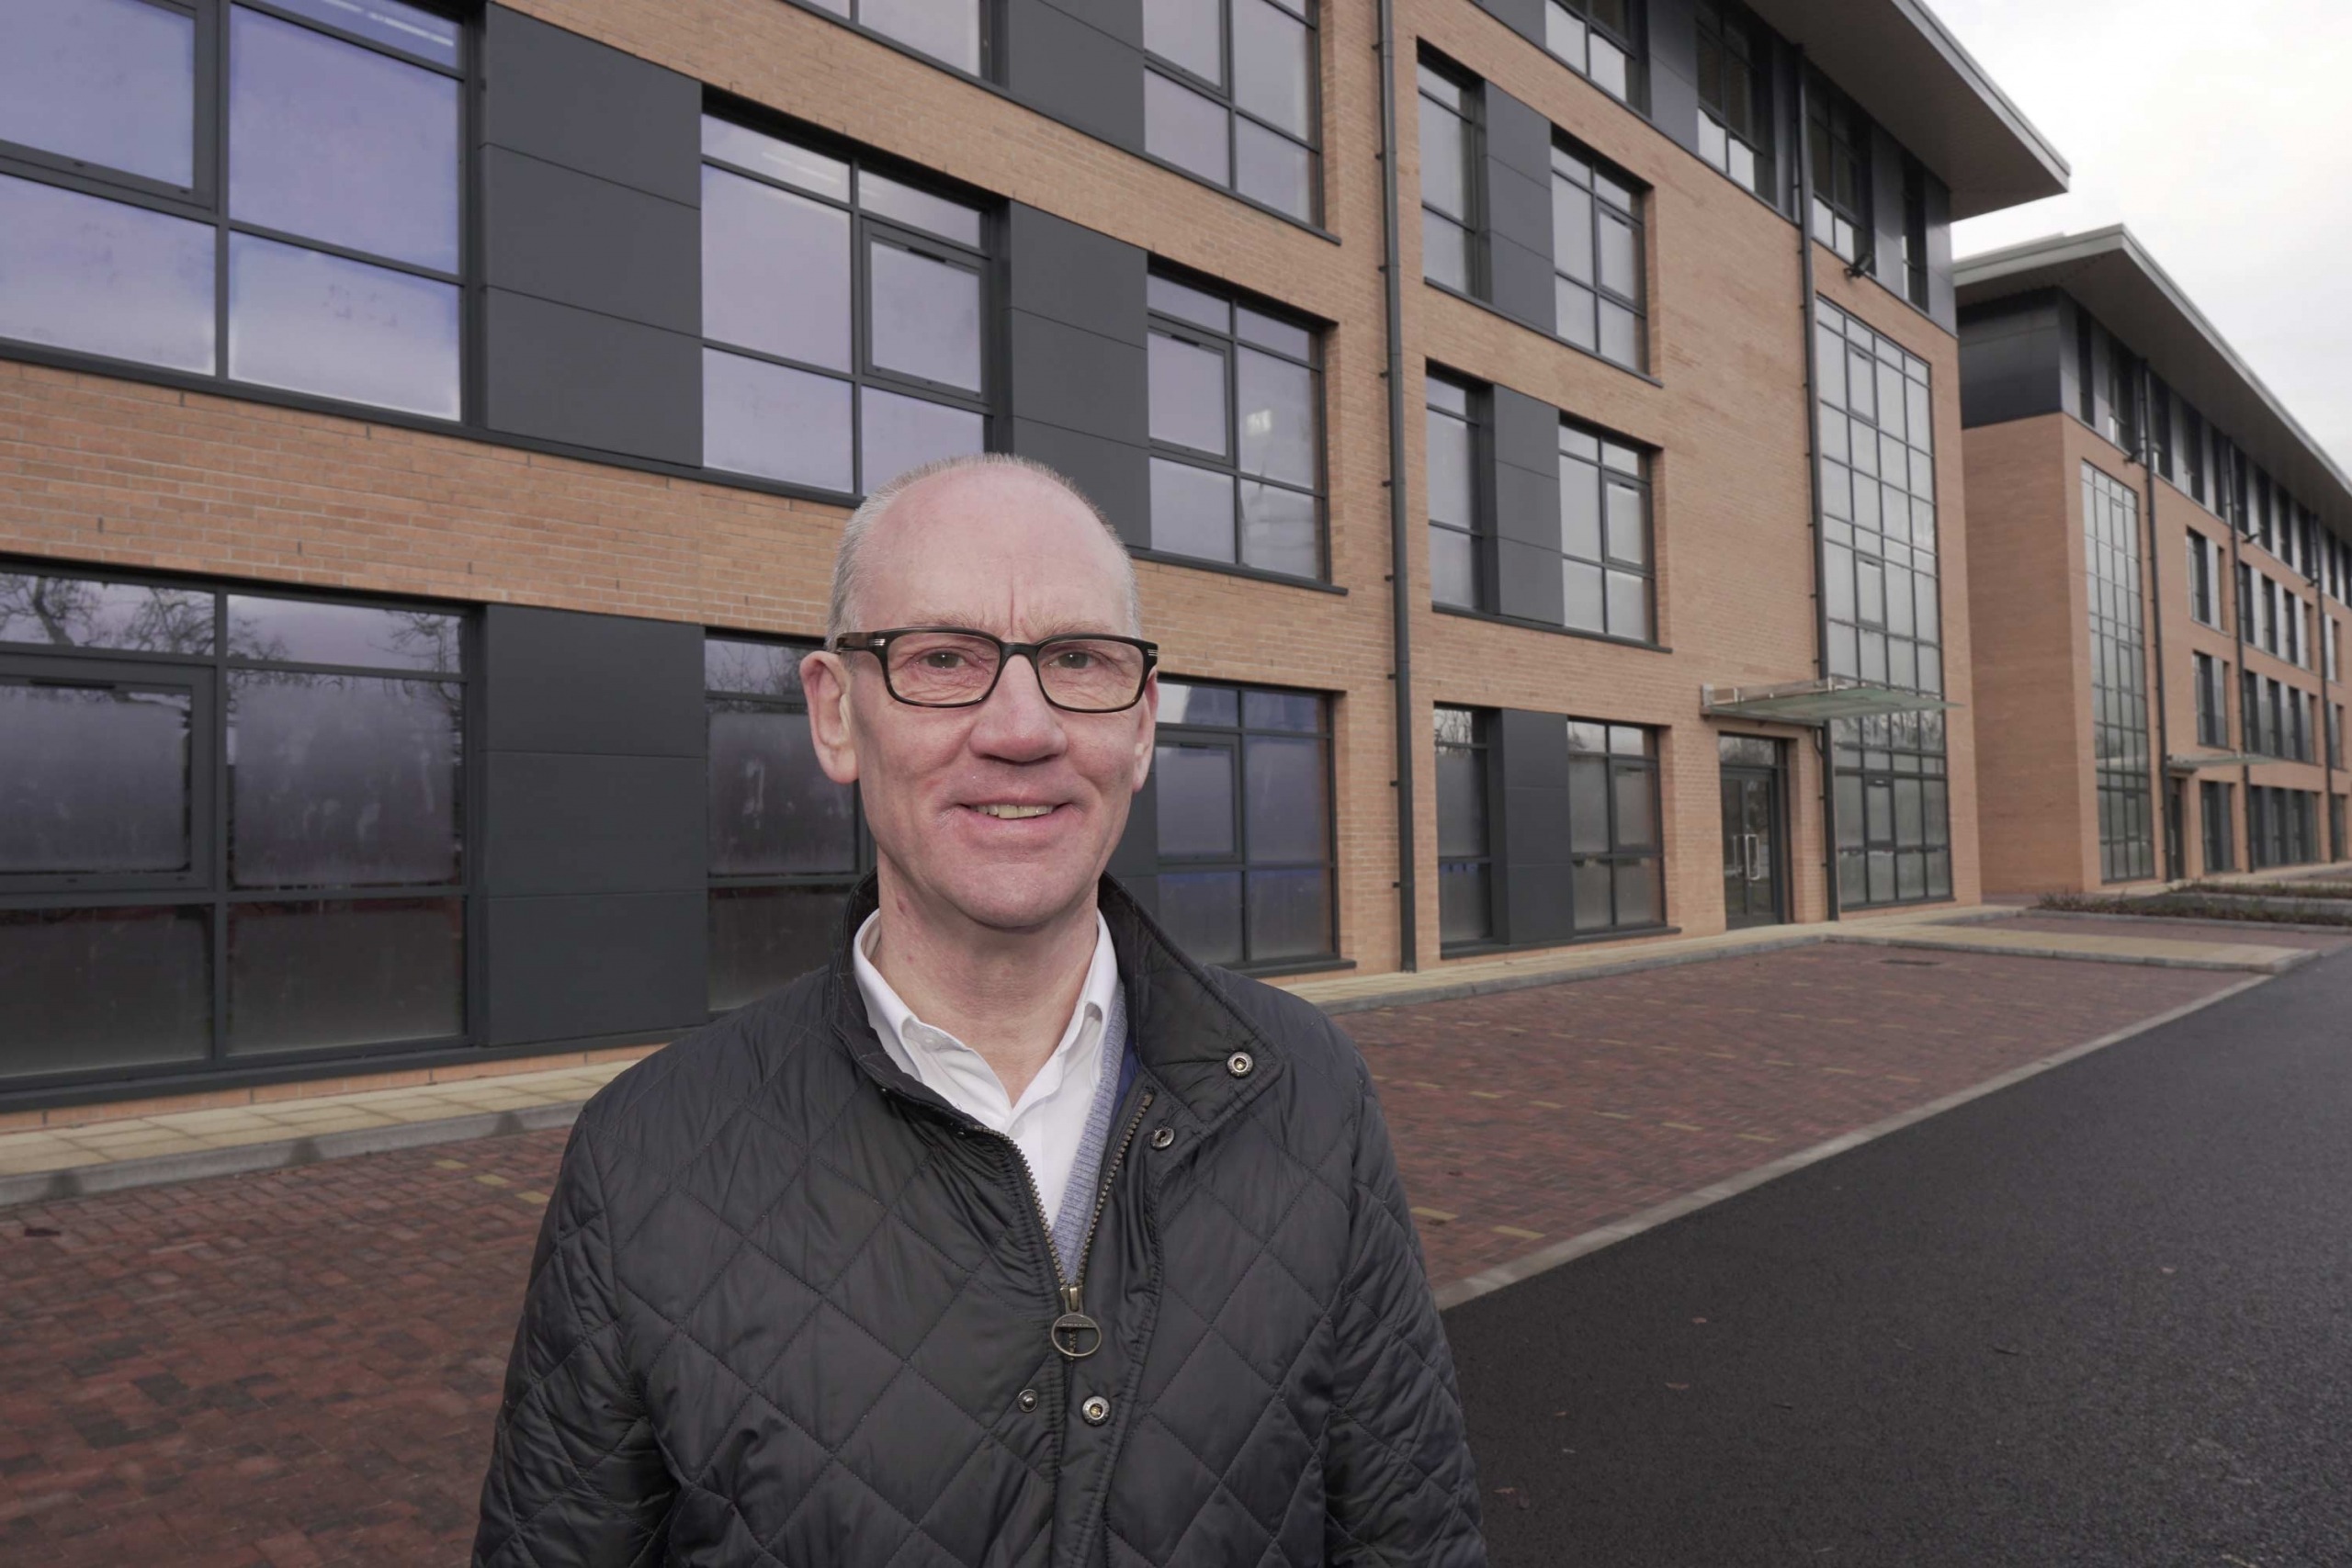 Chris Bentley, the owner and operator of Hornbeam Park Developments, in front of the Matrix, their latest development